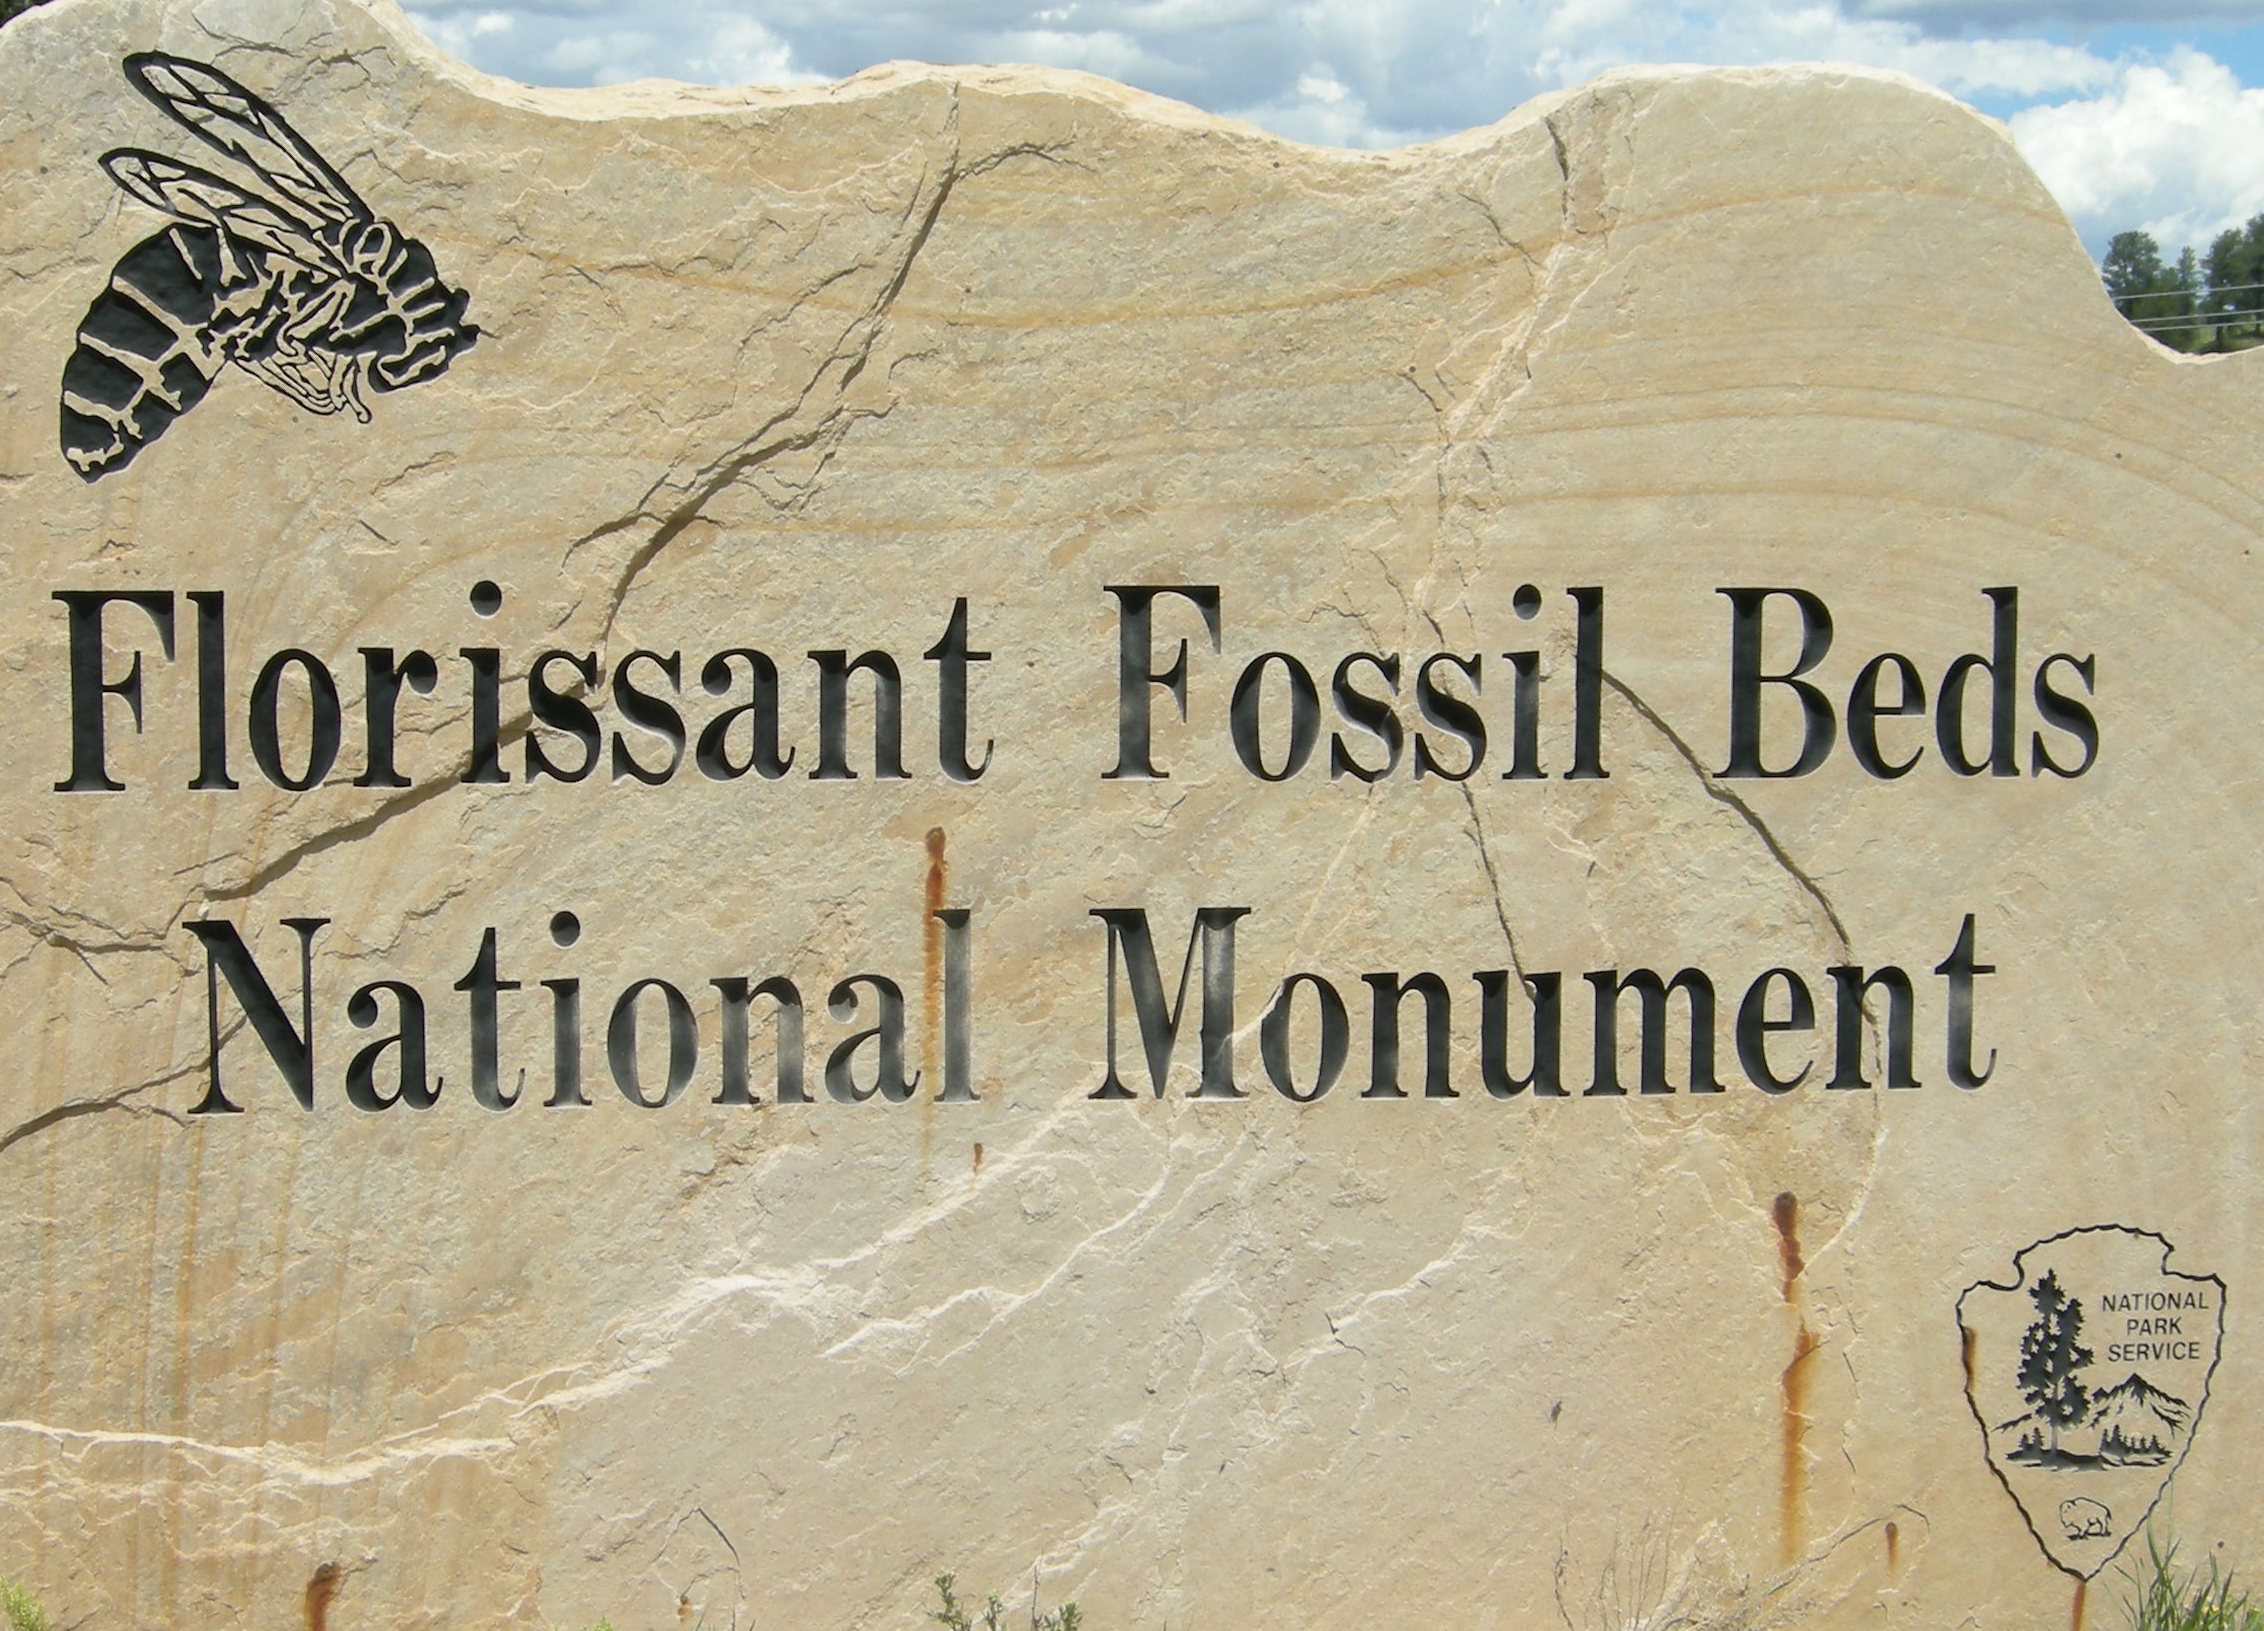 Close up of a sandstone sign with the words "Florissant Fossil Beds National Monument" written in black. There is also a black wasp on the top left and the NPS arrowhead in the bottom right.